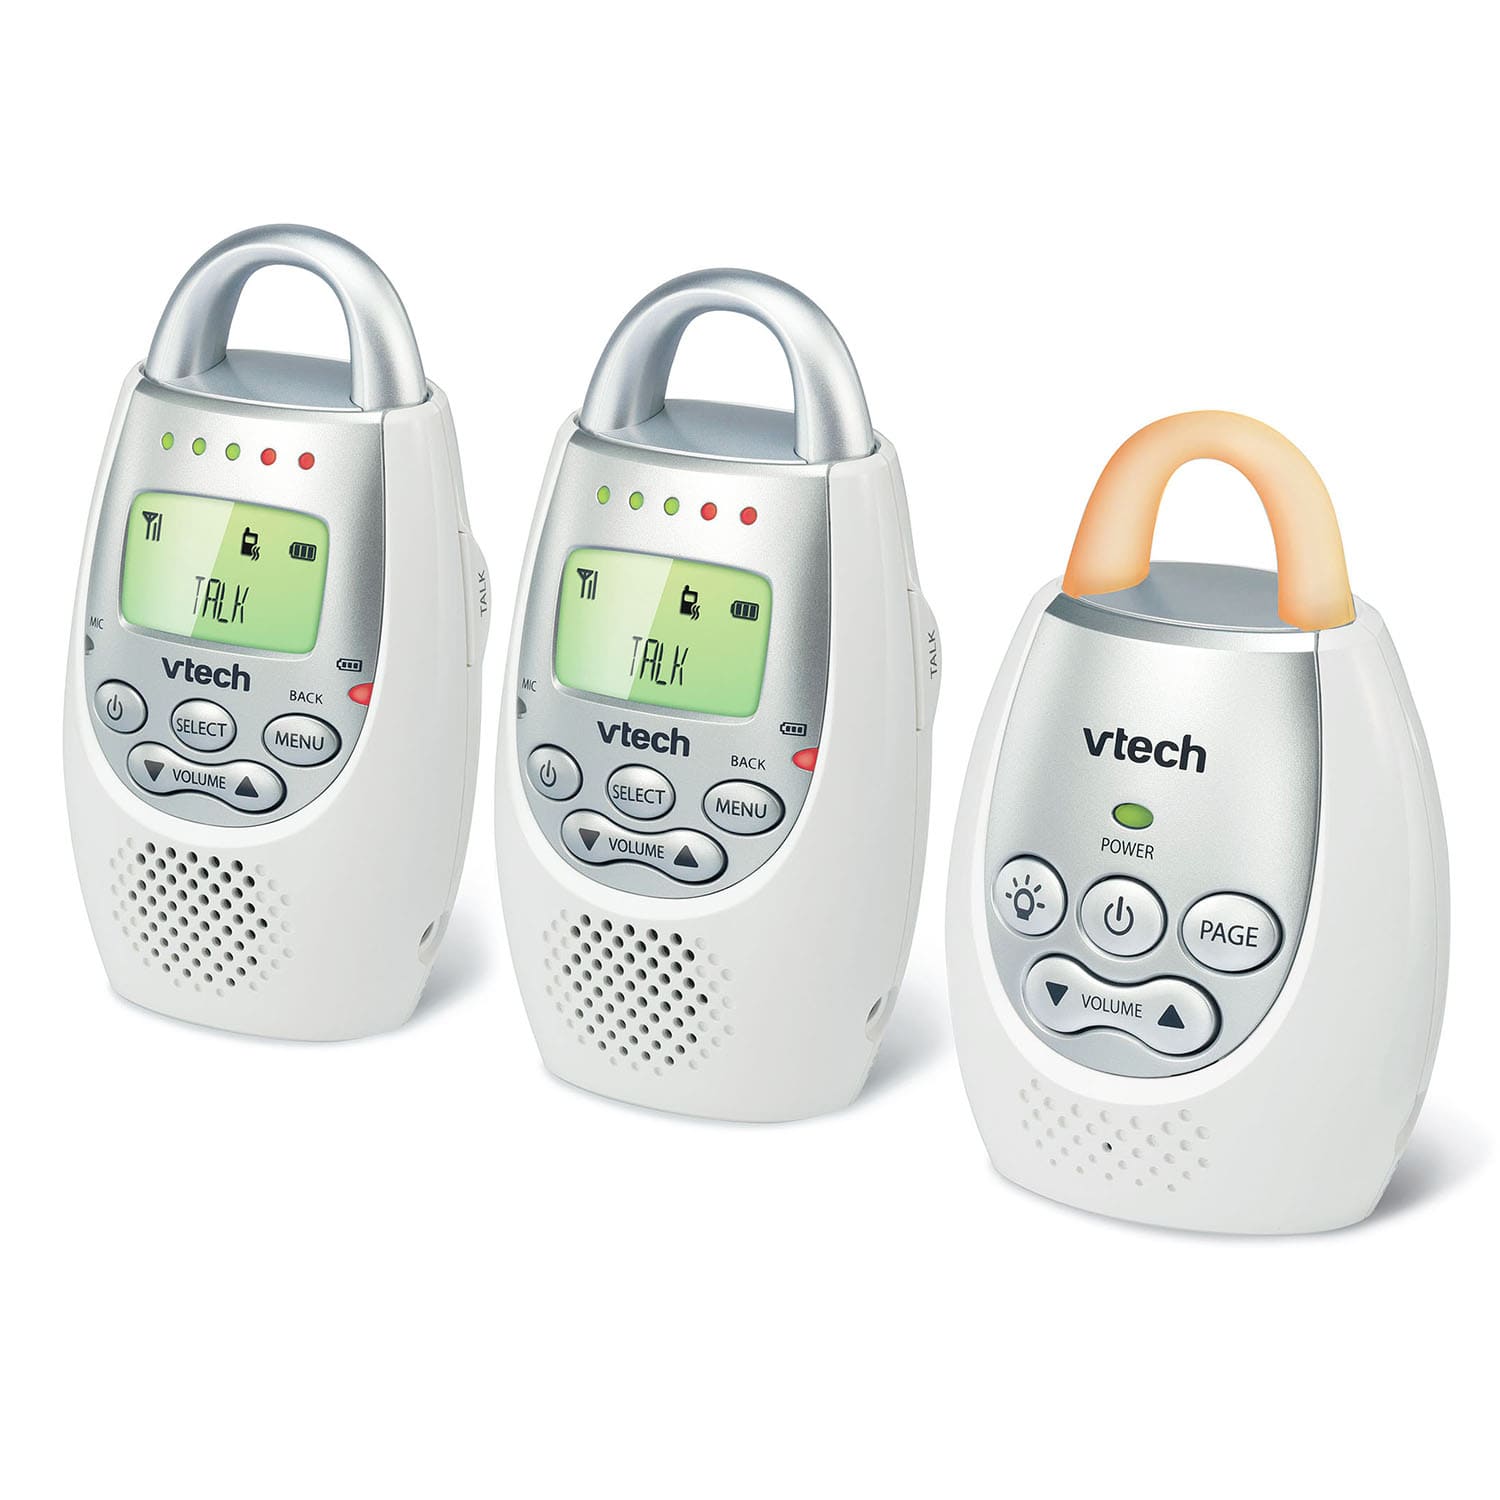 Vtech DM221-2 Digital Audio Baby Monitor With 2 Parent Units New In Box 